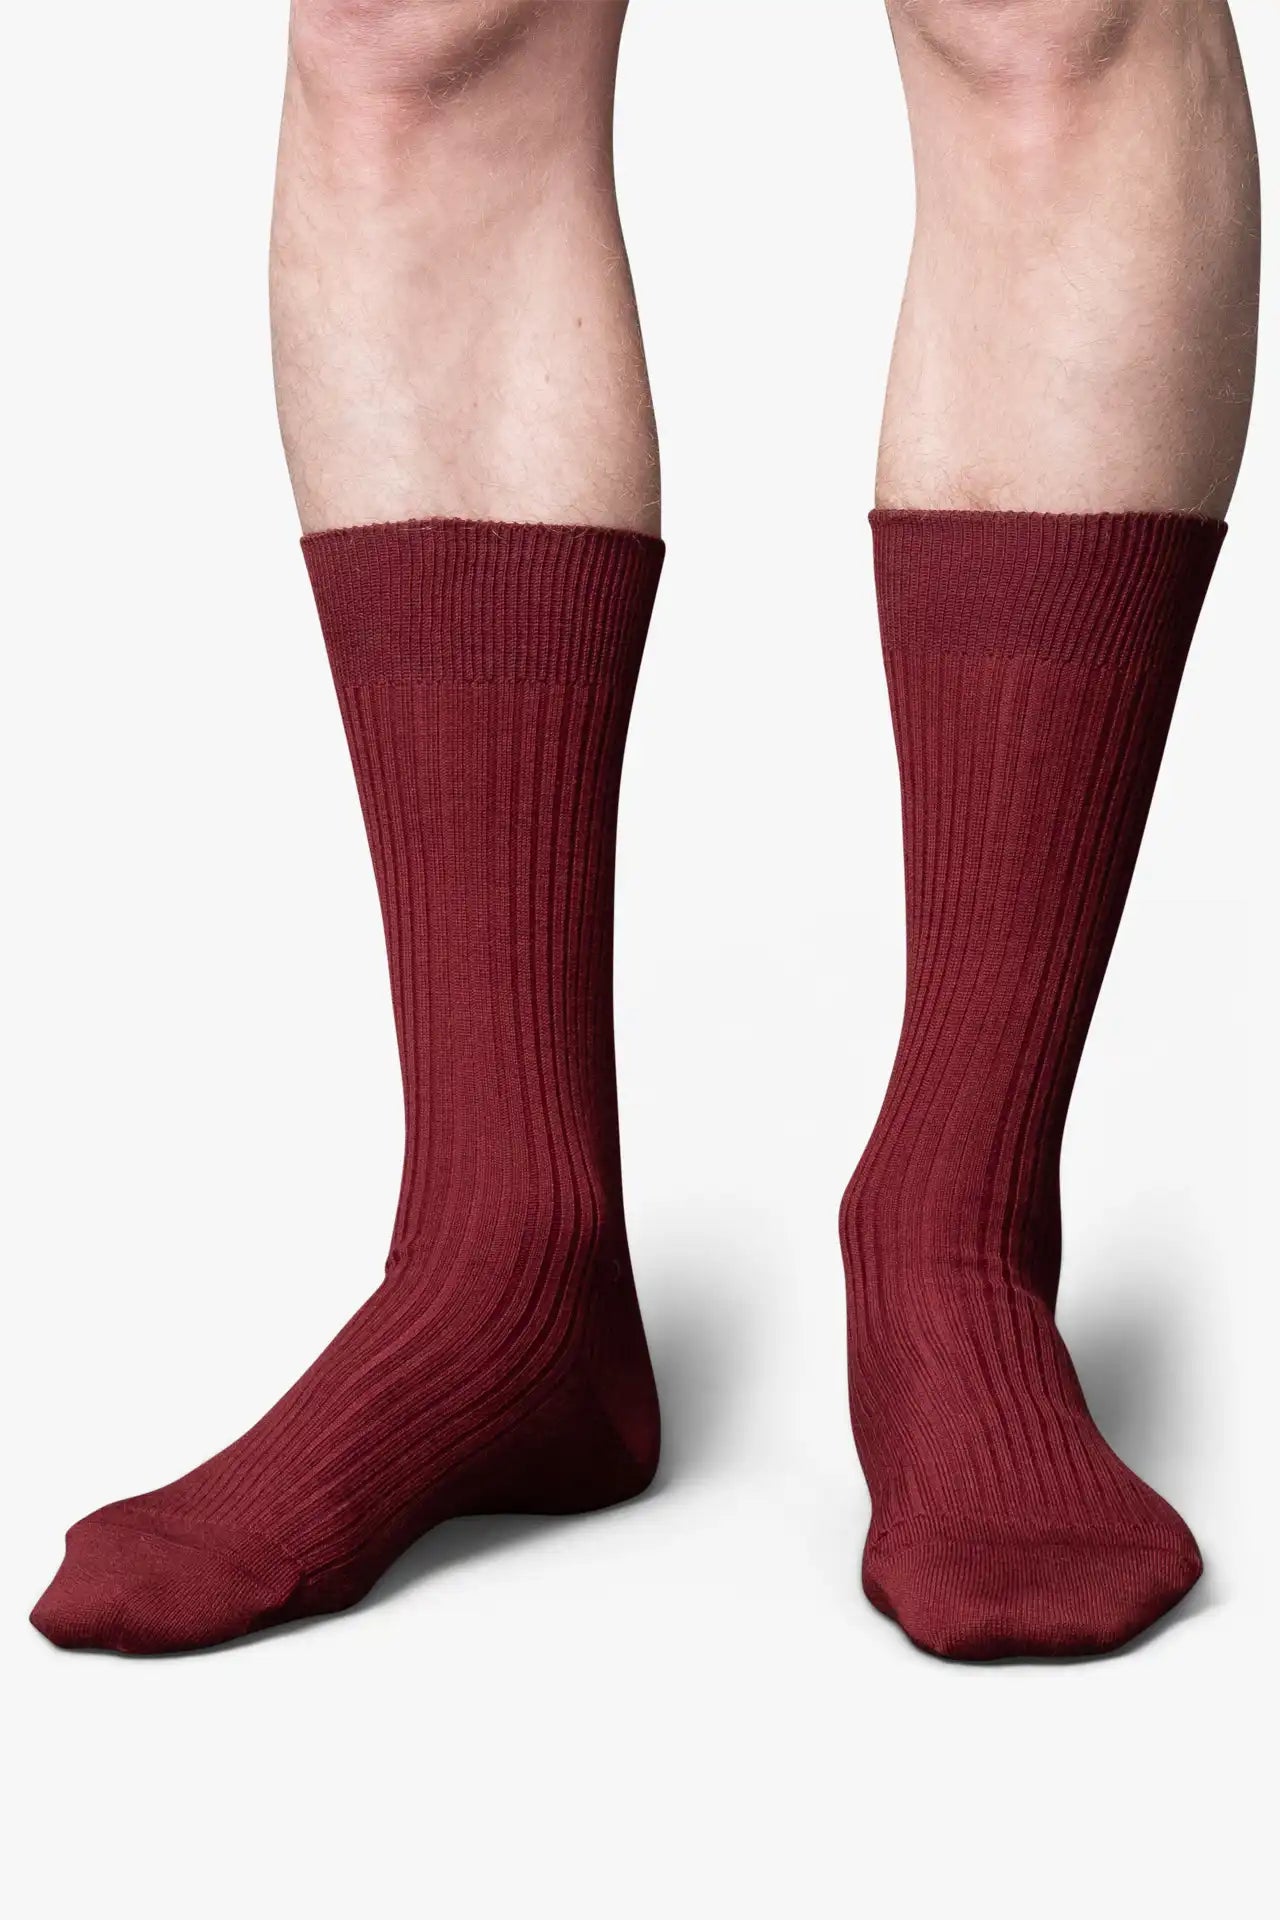 Burgundy red dress socks in merino wool. Swedish design by once a day and produced by glenn clyde. Can we washed in warm water without shrinking.